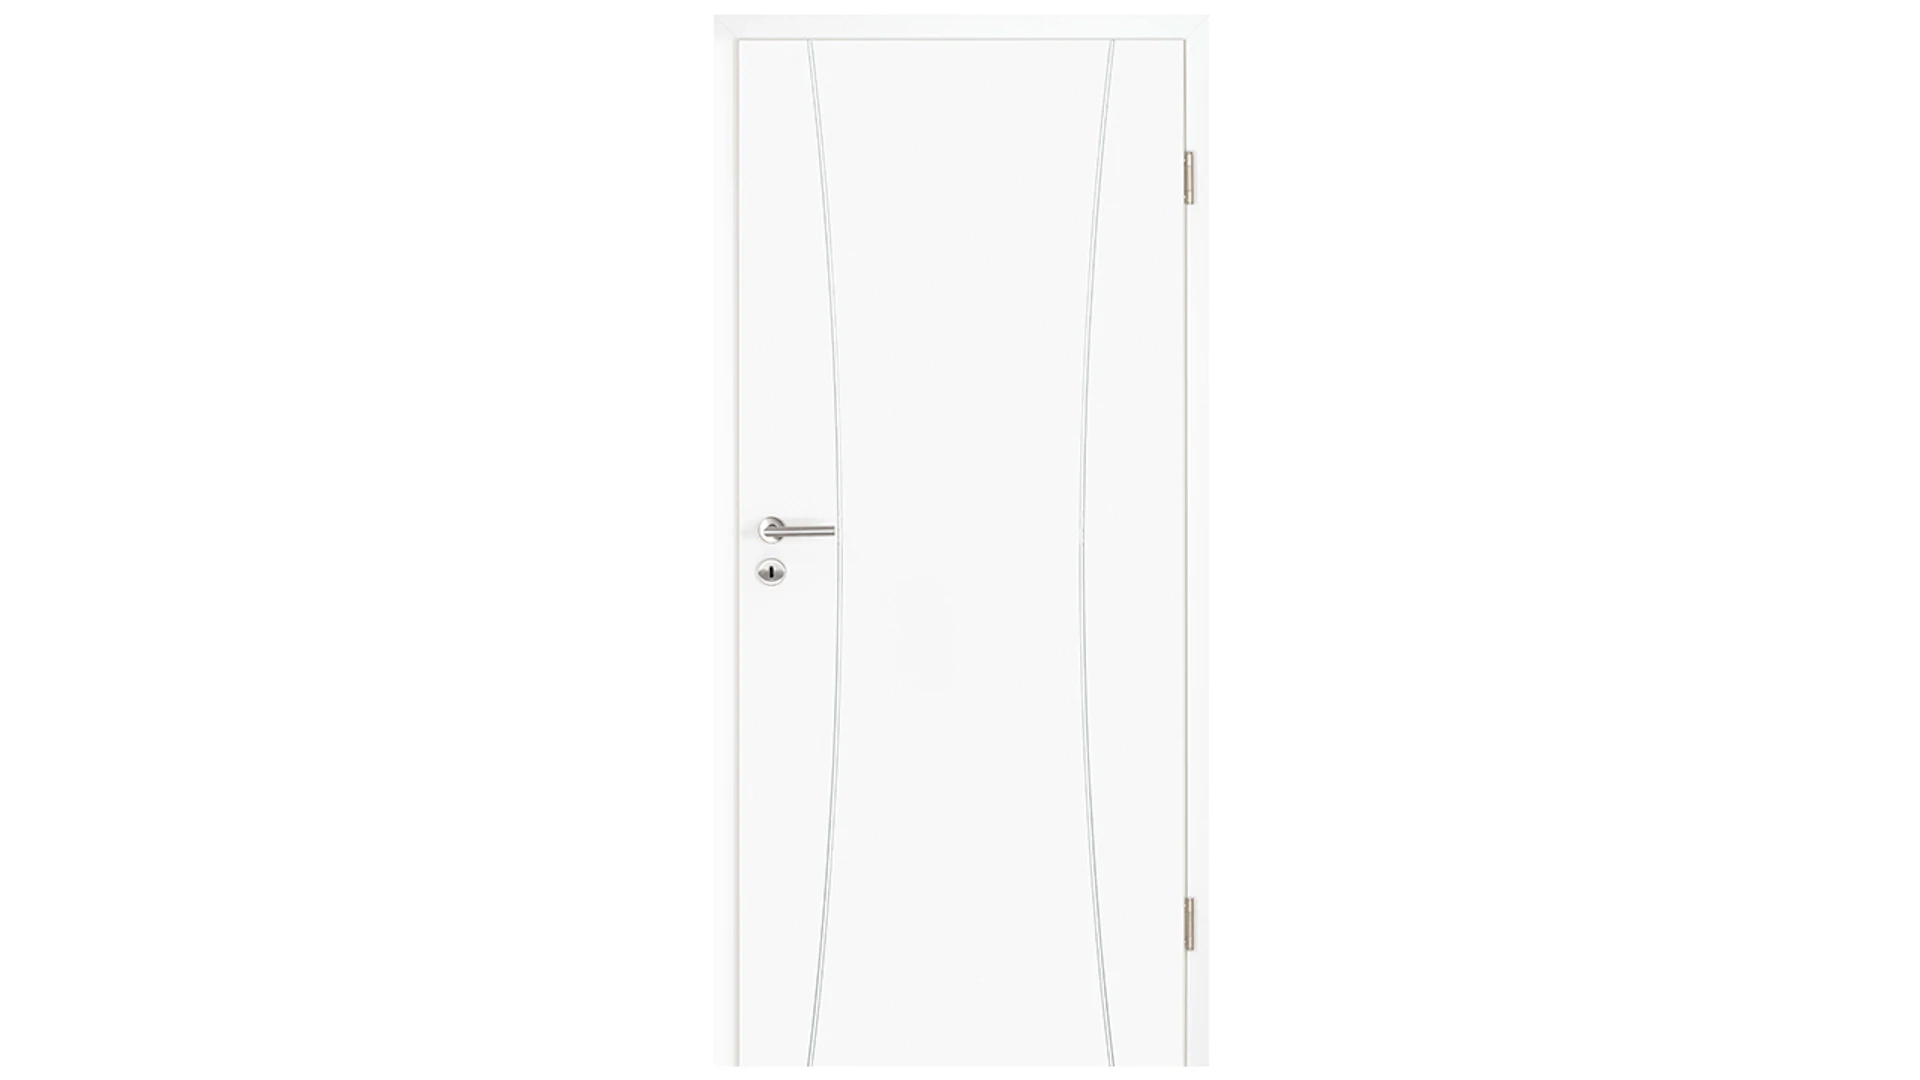 planeo interior door lacquer 2.0 - Kunibald 9010 white lacquer 1985 x 735 mm DIN R - round RSP hinge 3-t